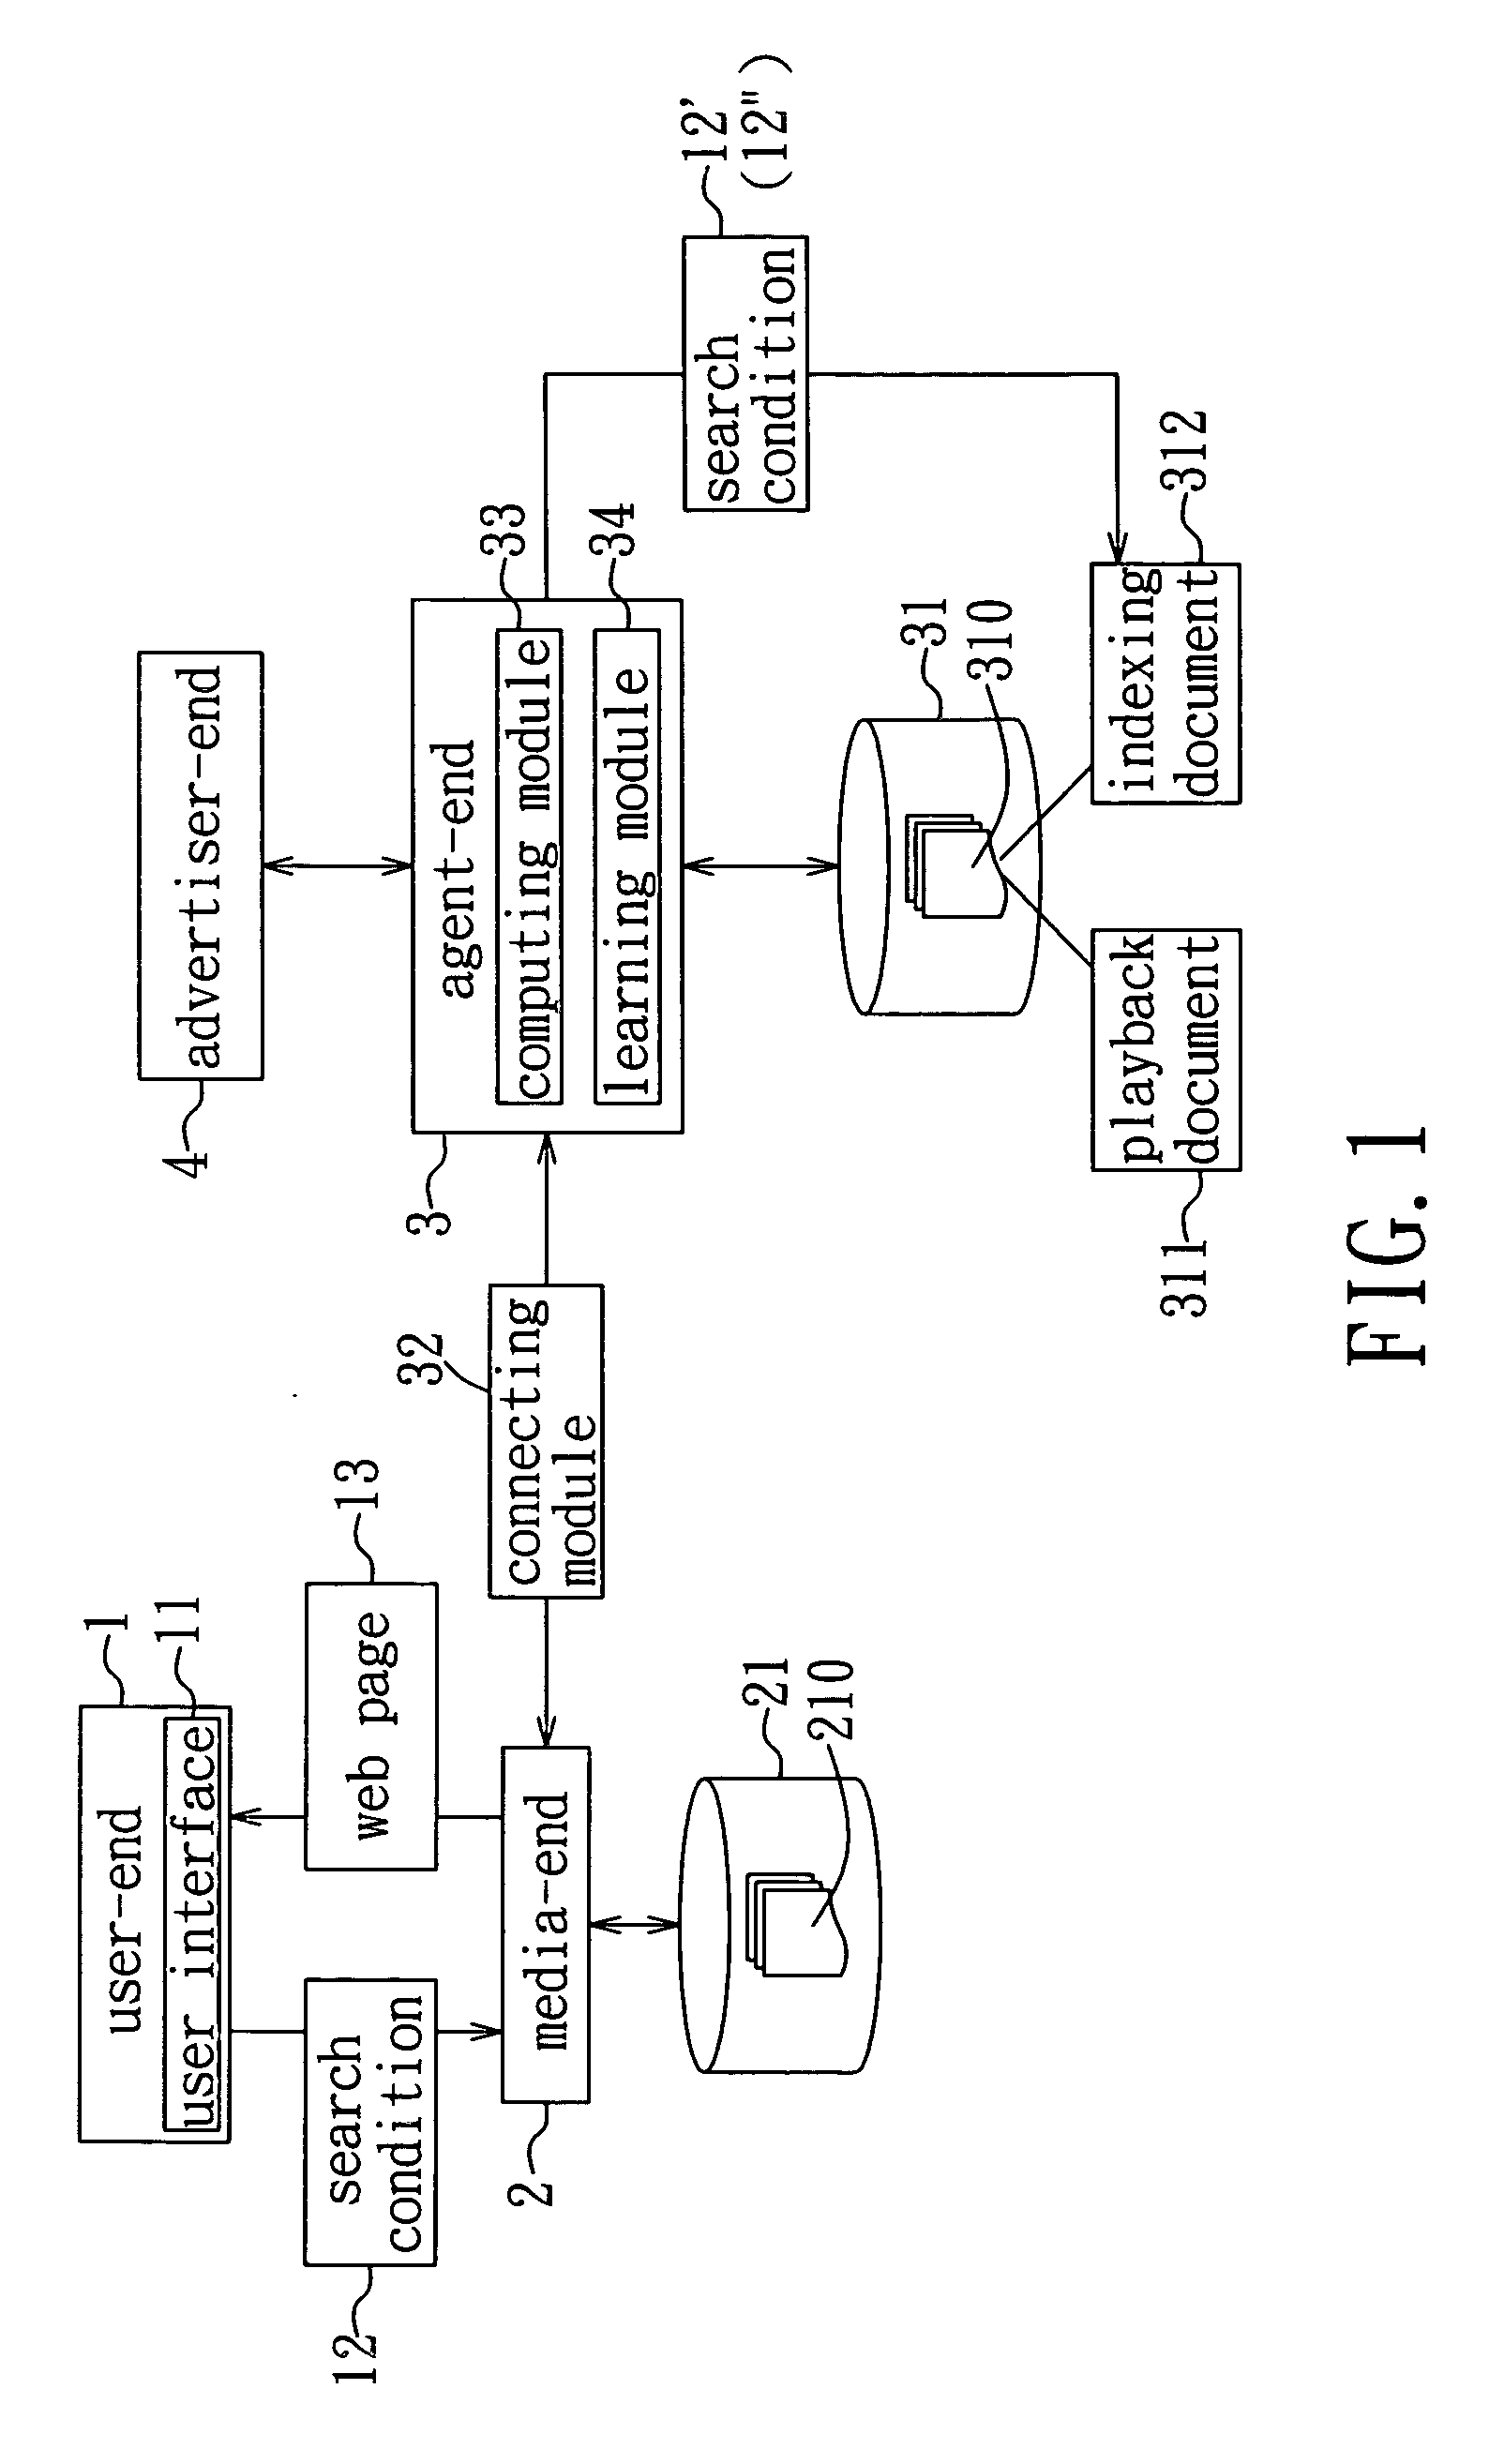 Method and system for web page advertising, and method of running a web page advertising agency